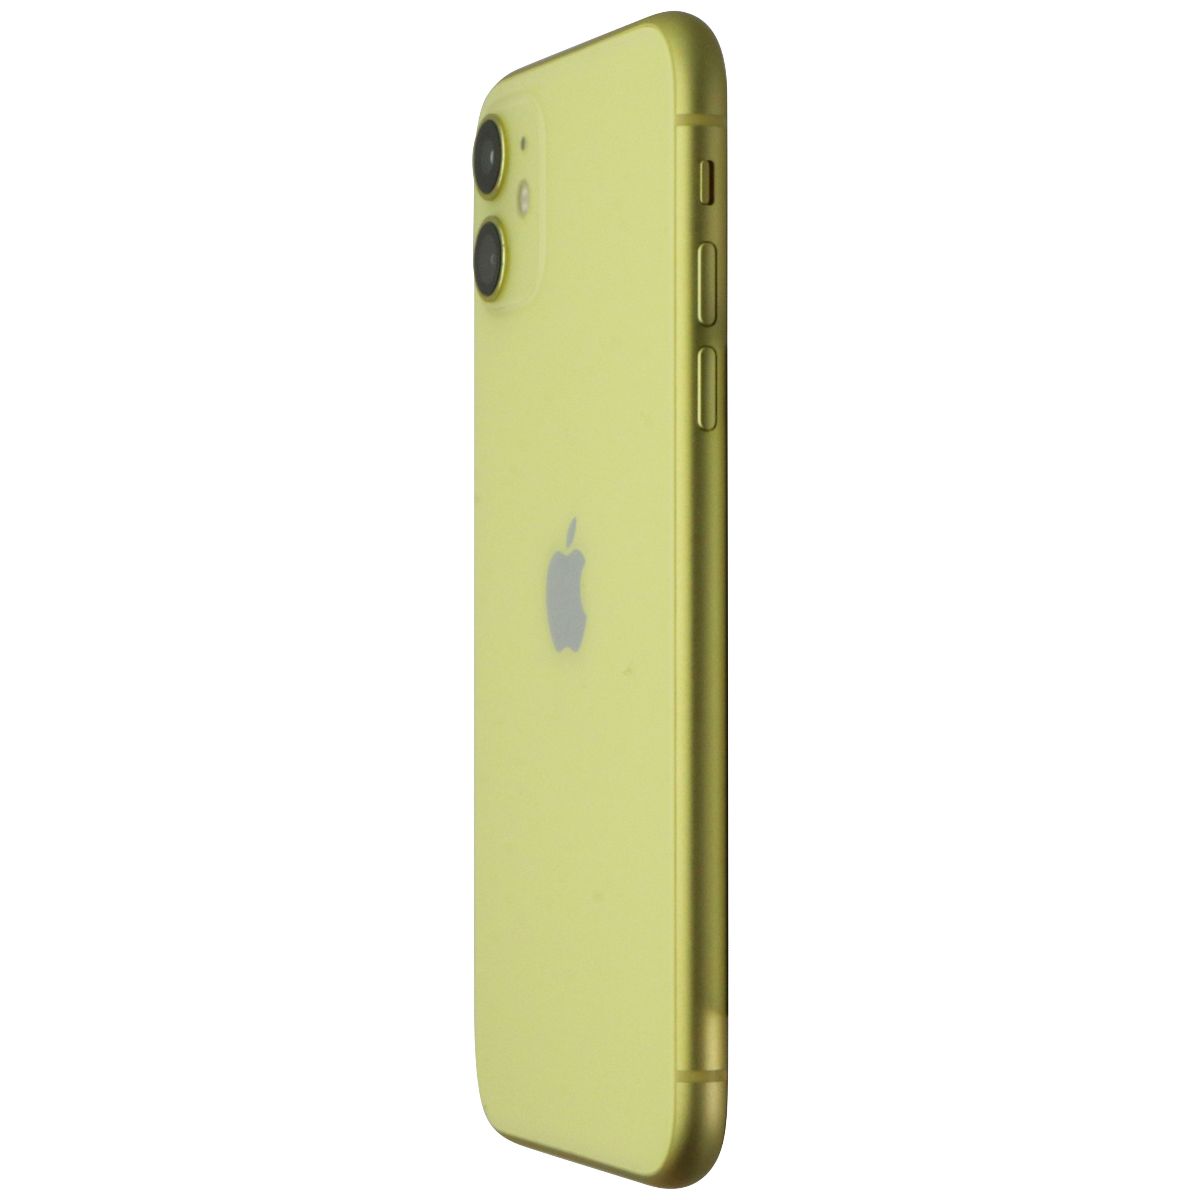 Apple iPhone 11 (6.1-inch / A2111) Unlocked - 128GB/Yellow **NO BLUETOOTH Cell Phones & Smartphones Apple    - Simple Cell Bulk Wholesale Pricing - USA Seller